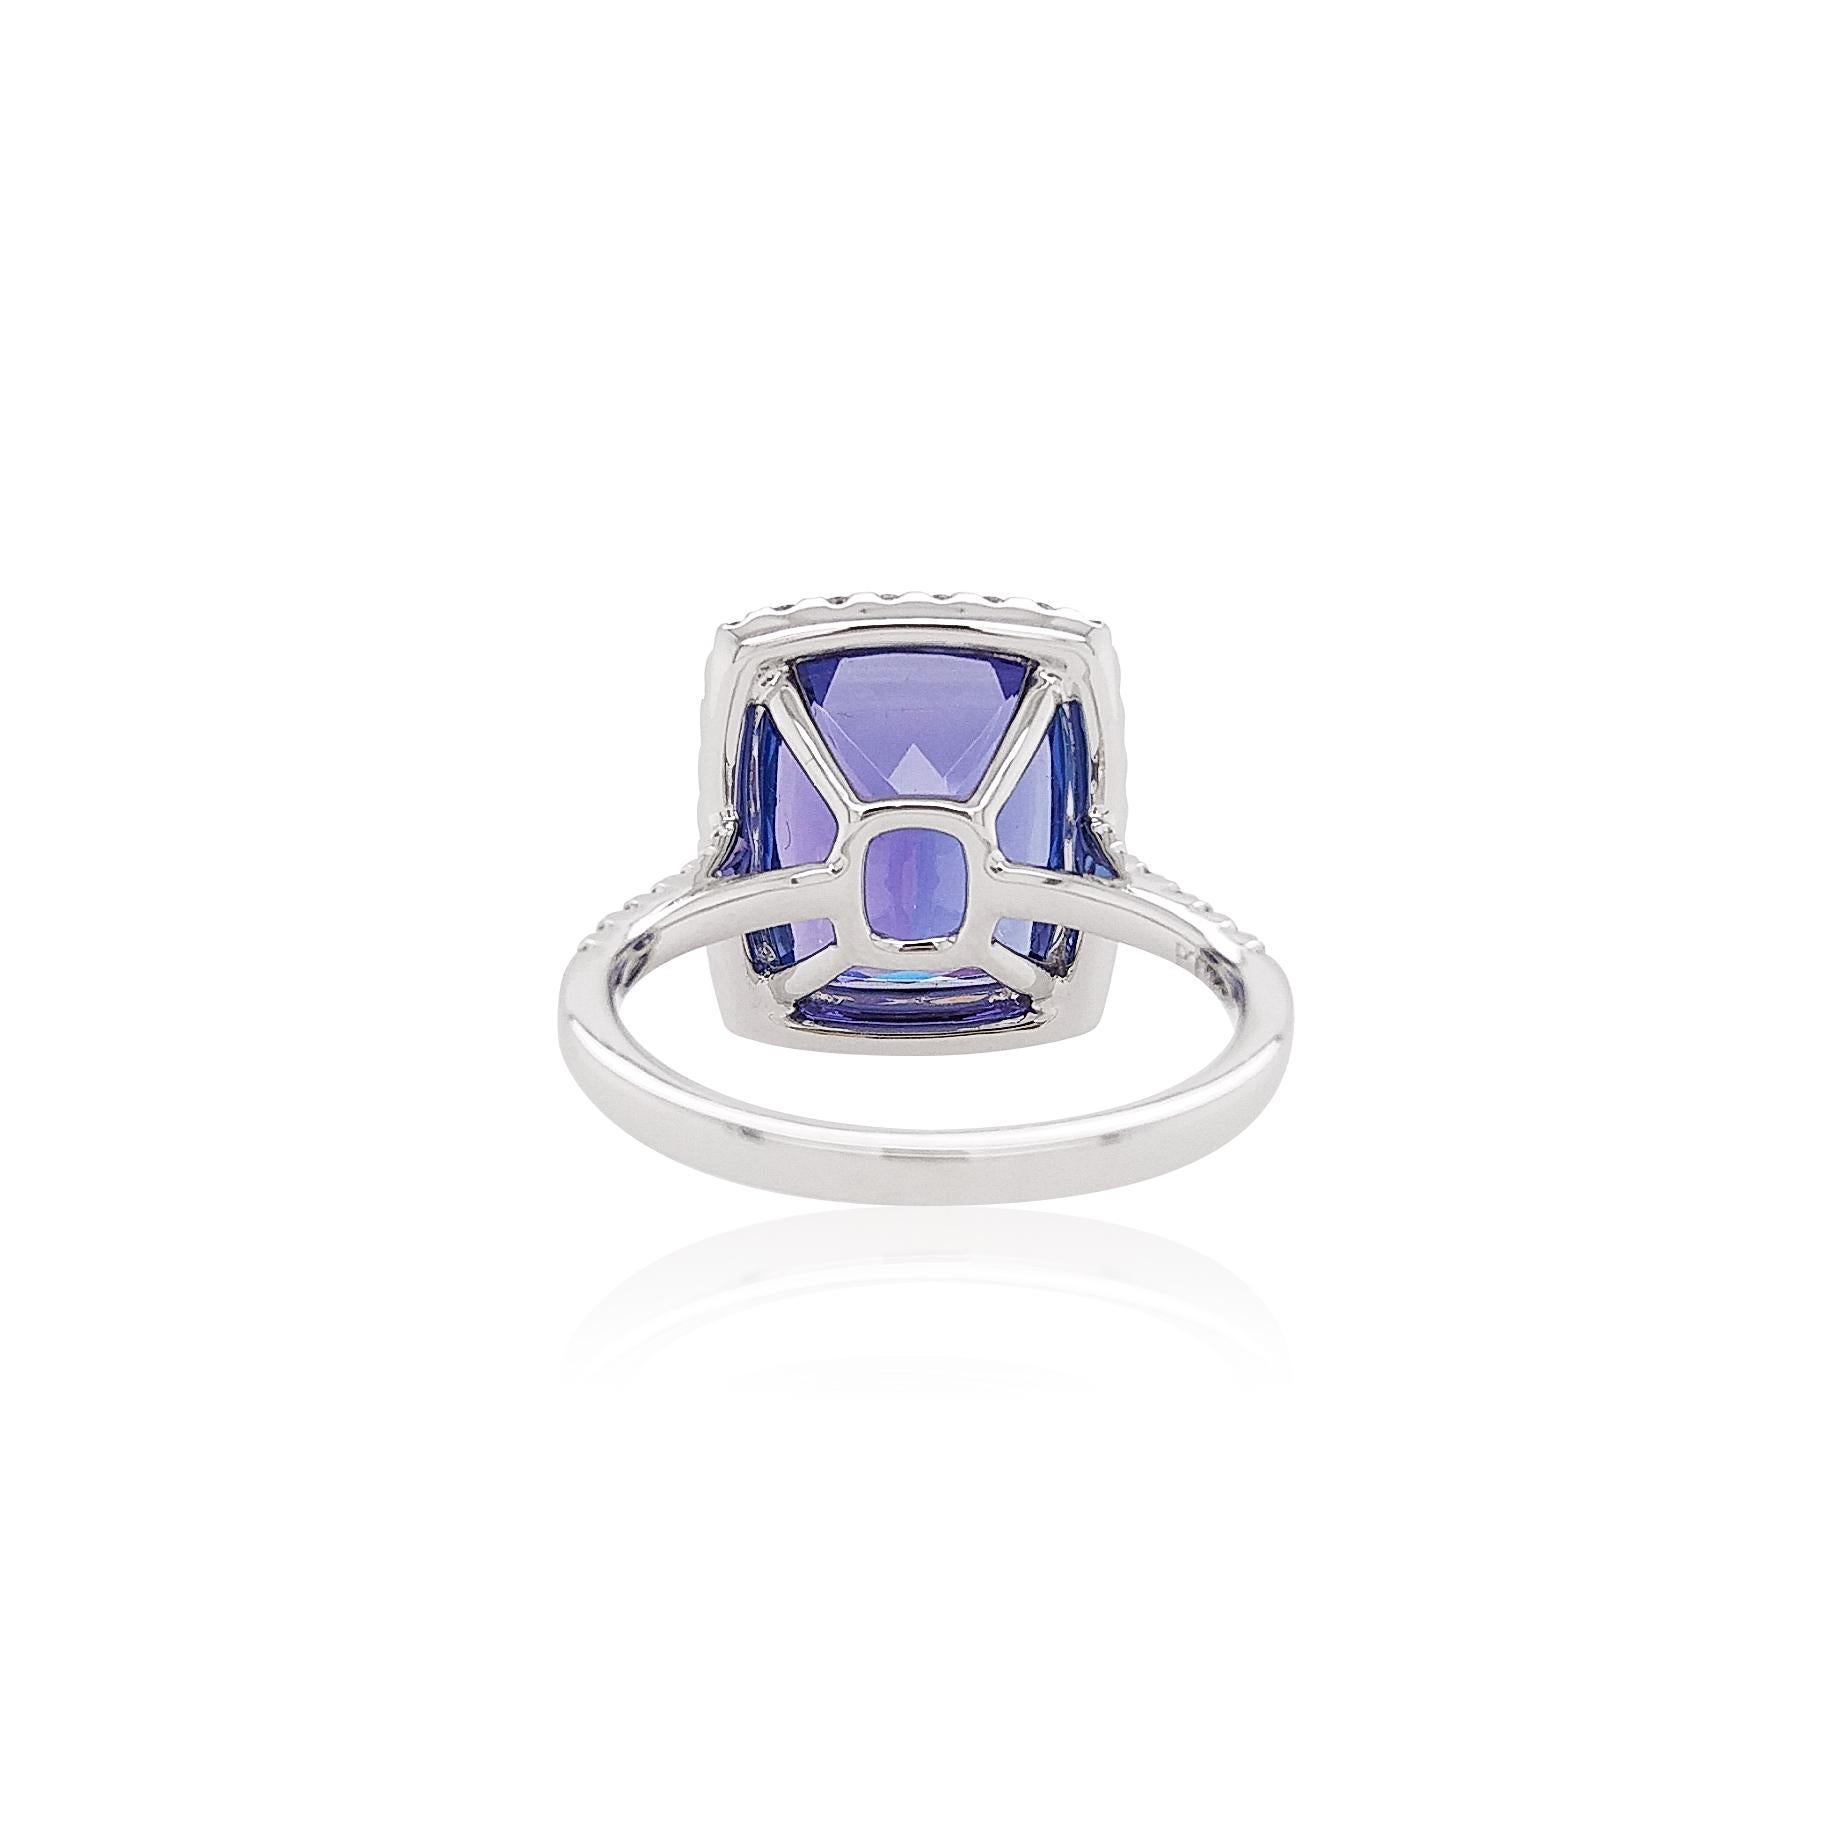 This graceful ring features a lustrous Tanzanite set amongst sparkling White Diamonds. The platinum setting enriches the cool hues of the Tanzanite and the sparkle of the White Diamonds. This ring holds romantic connotations and would make a